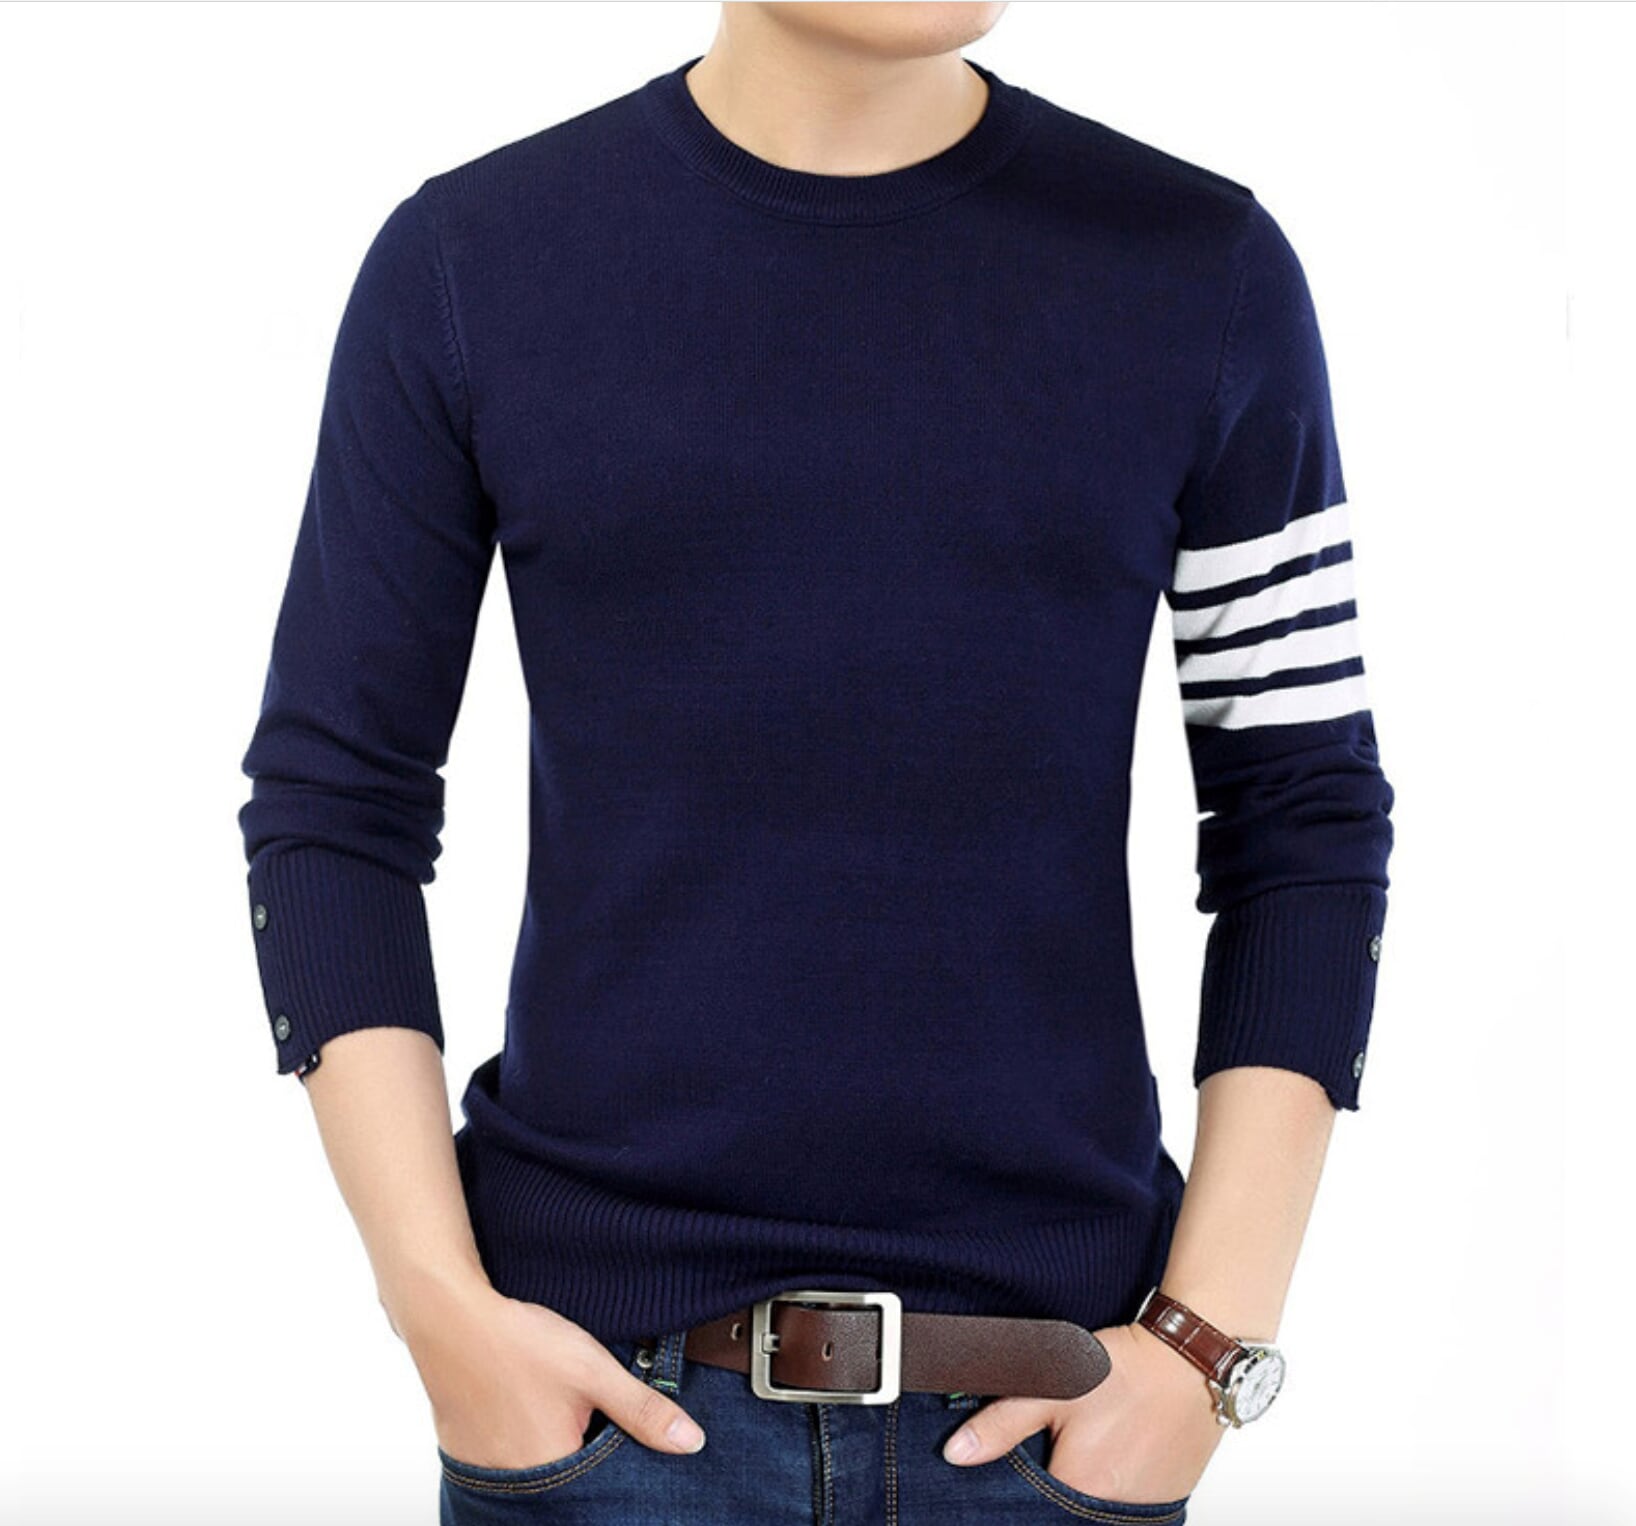 Mens Round Neck Sweater with Stripes